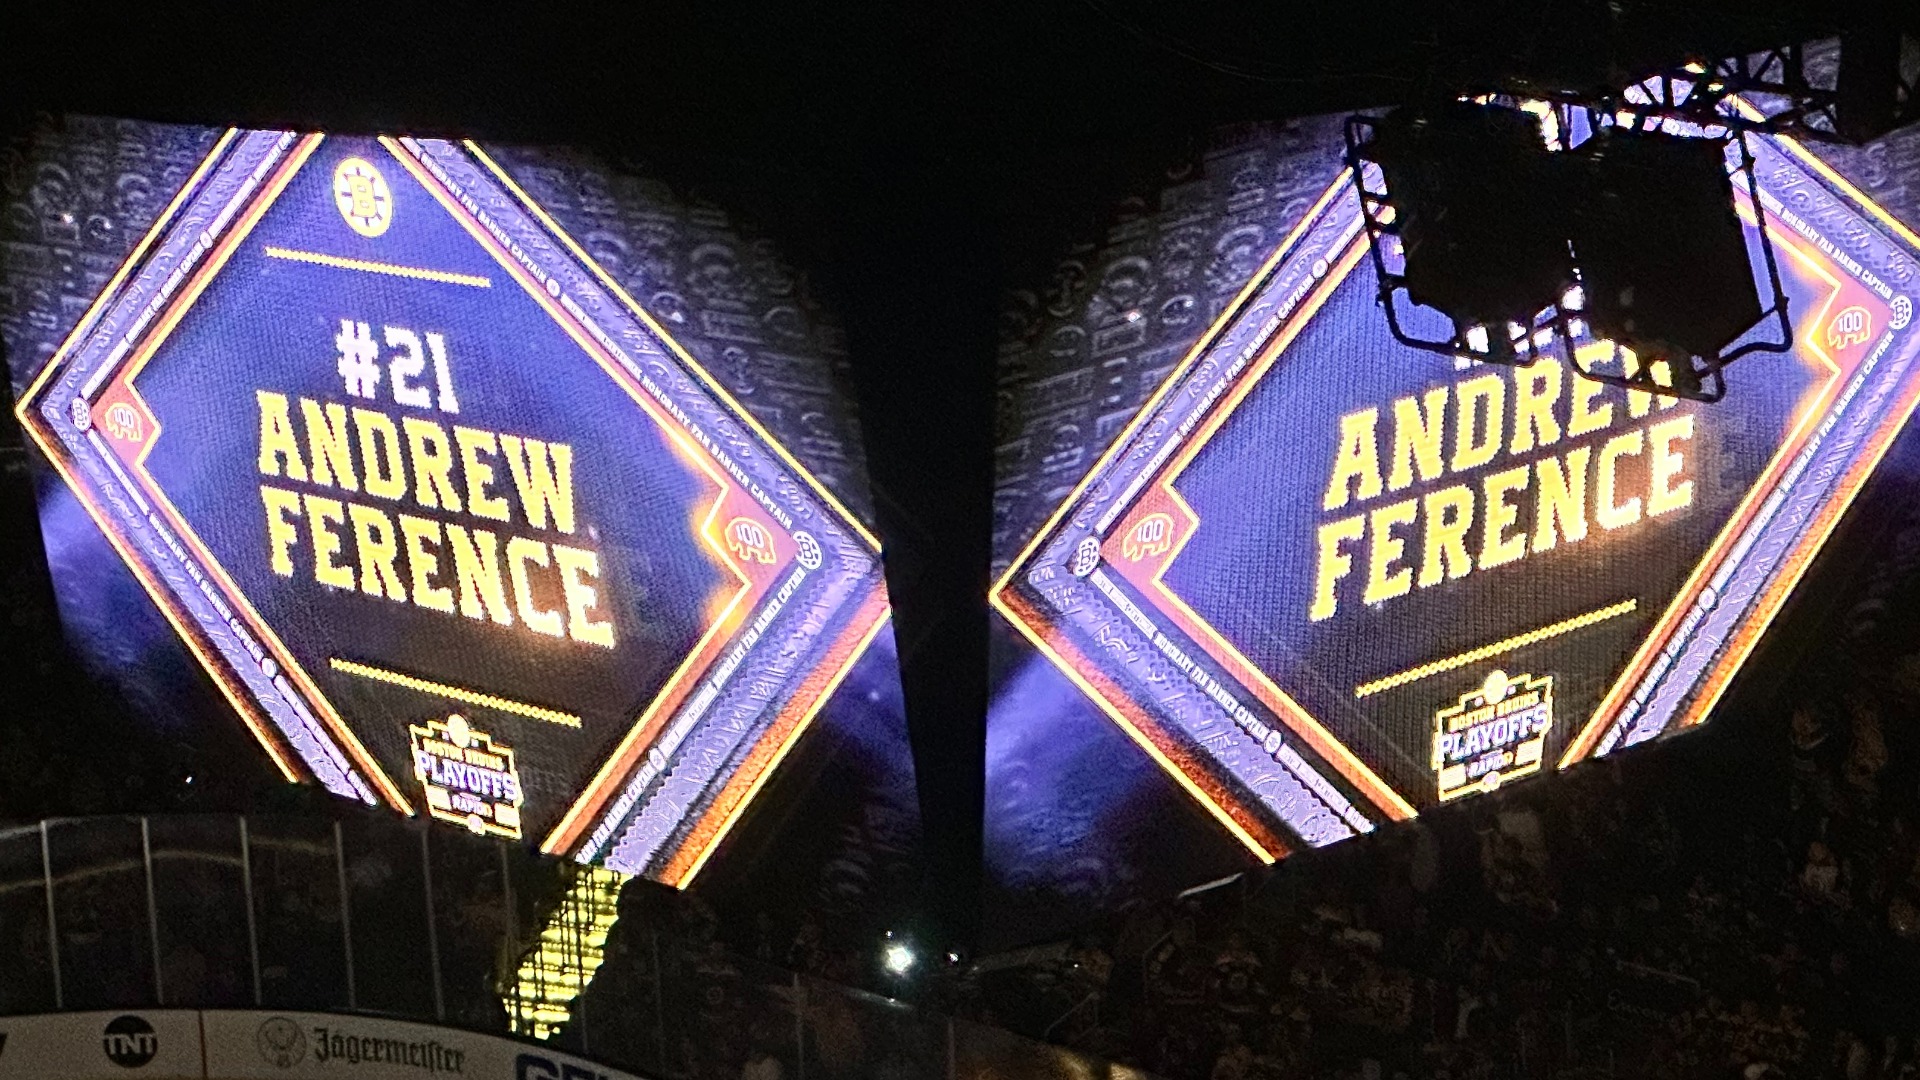 Bruins Make Stanley Cup Champion Andrew Ference Honorary Banner
Captain